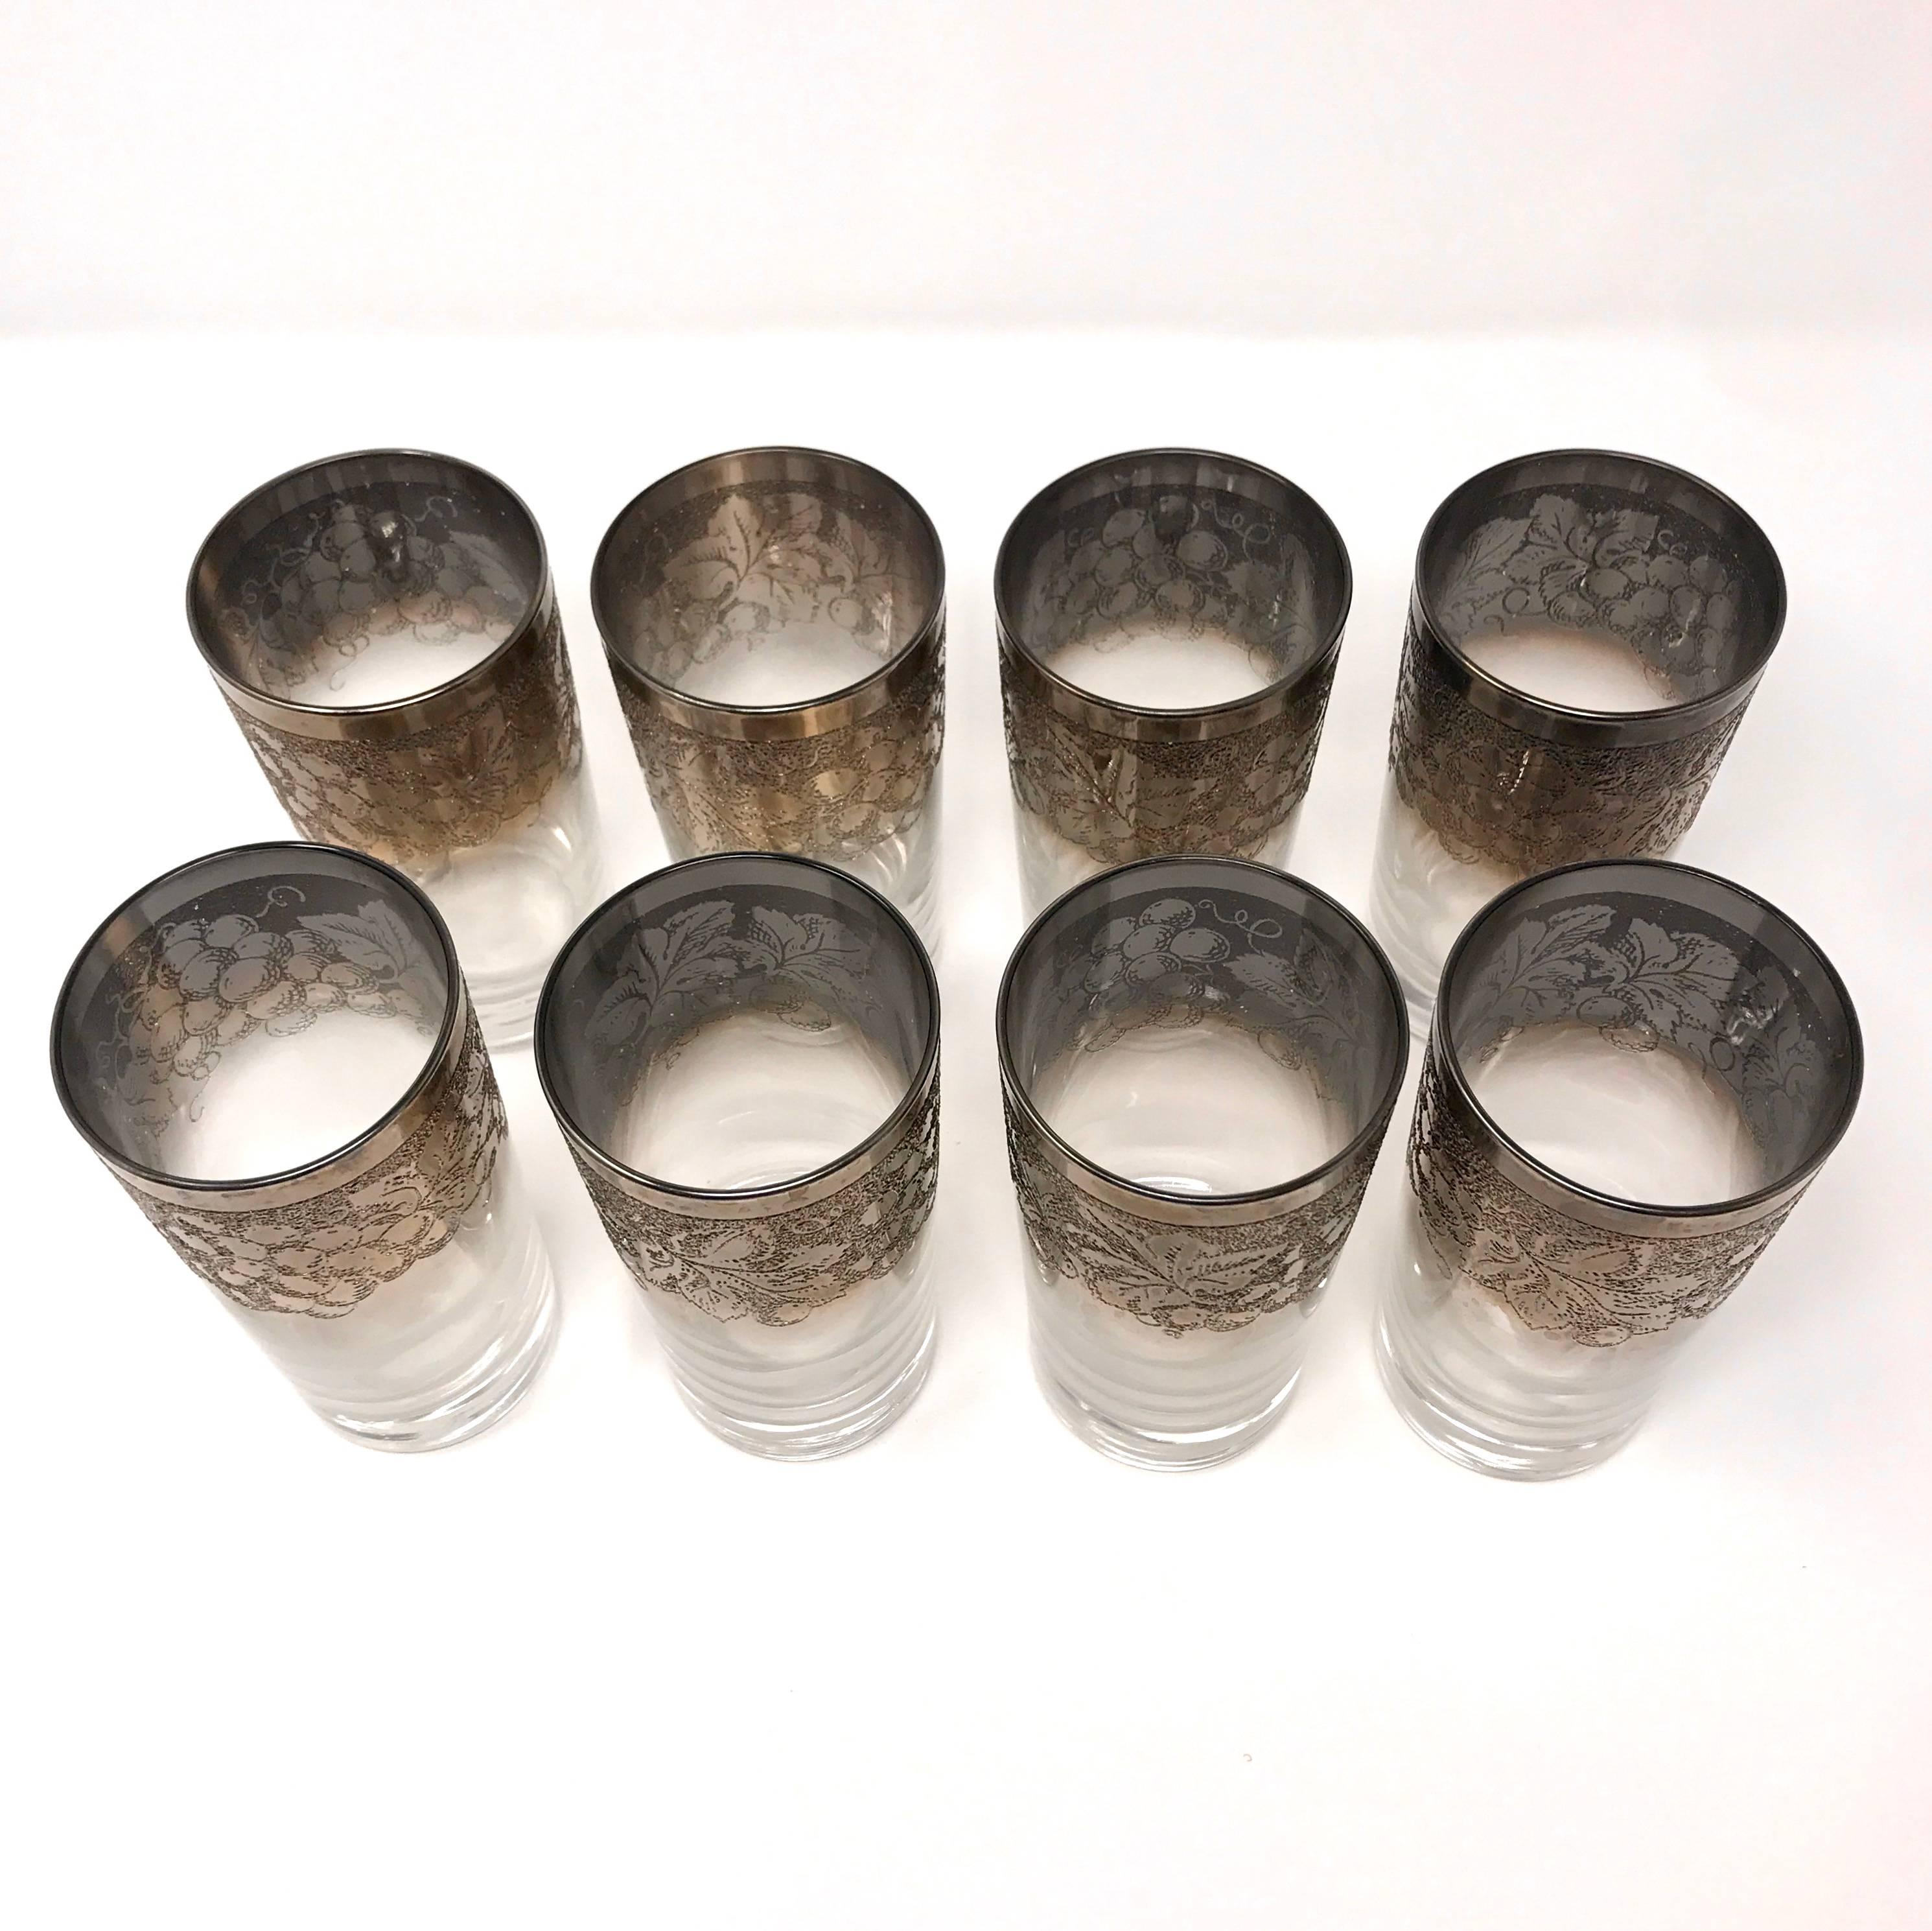 Set of eight midcentury highball glasses by Dorothy Thorpe. The crystal glasses feature a sterling silver overlay, with a design of grape vines, leaves, and clusters. Price is for the set.